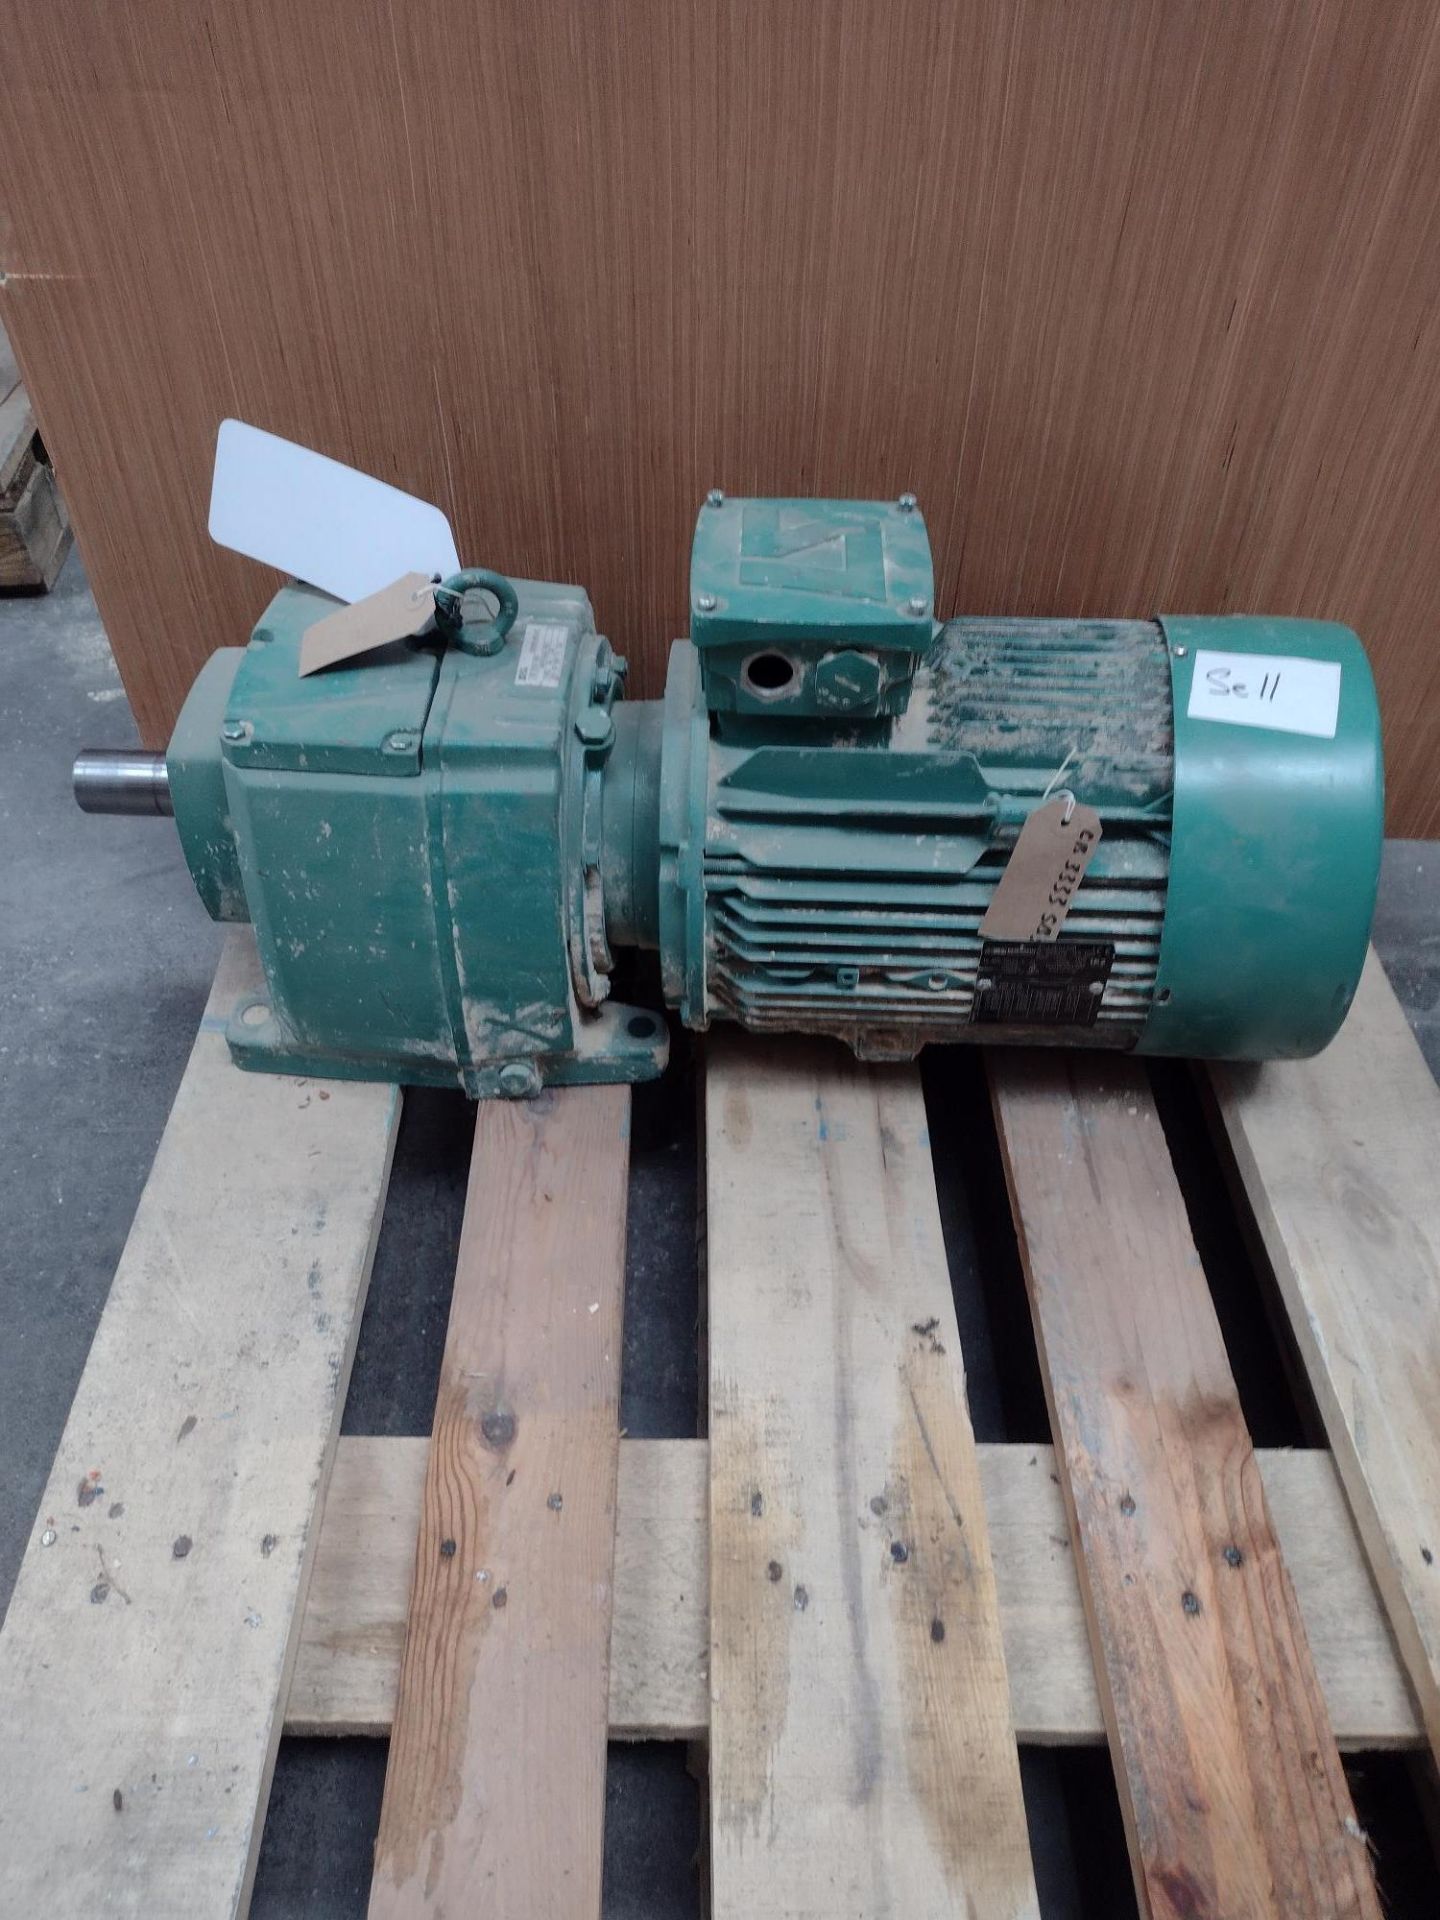 Leroy Somer 7.5kW Electric Motor, year of manufacture 2015, with fitted gearbox. Lot located